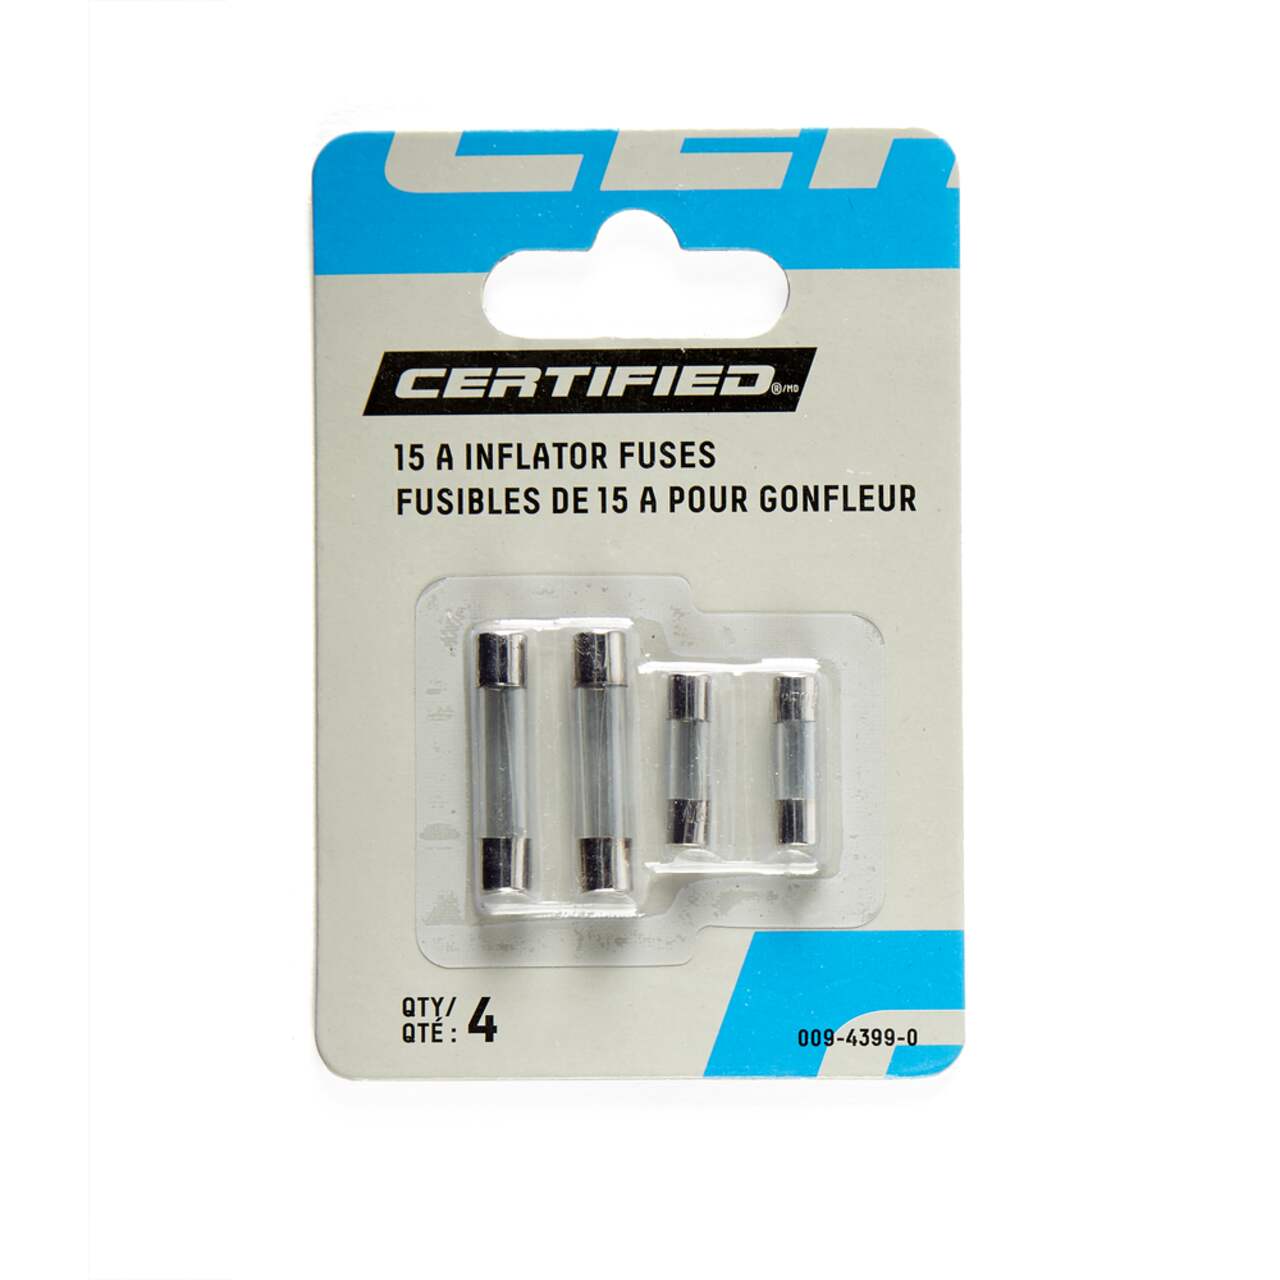 Certified 15 A Universal Inflator Fuses, 4-pk